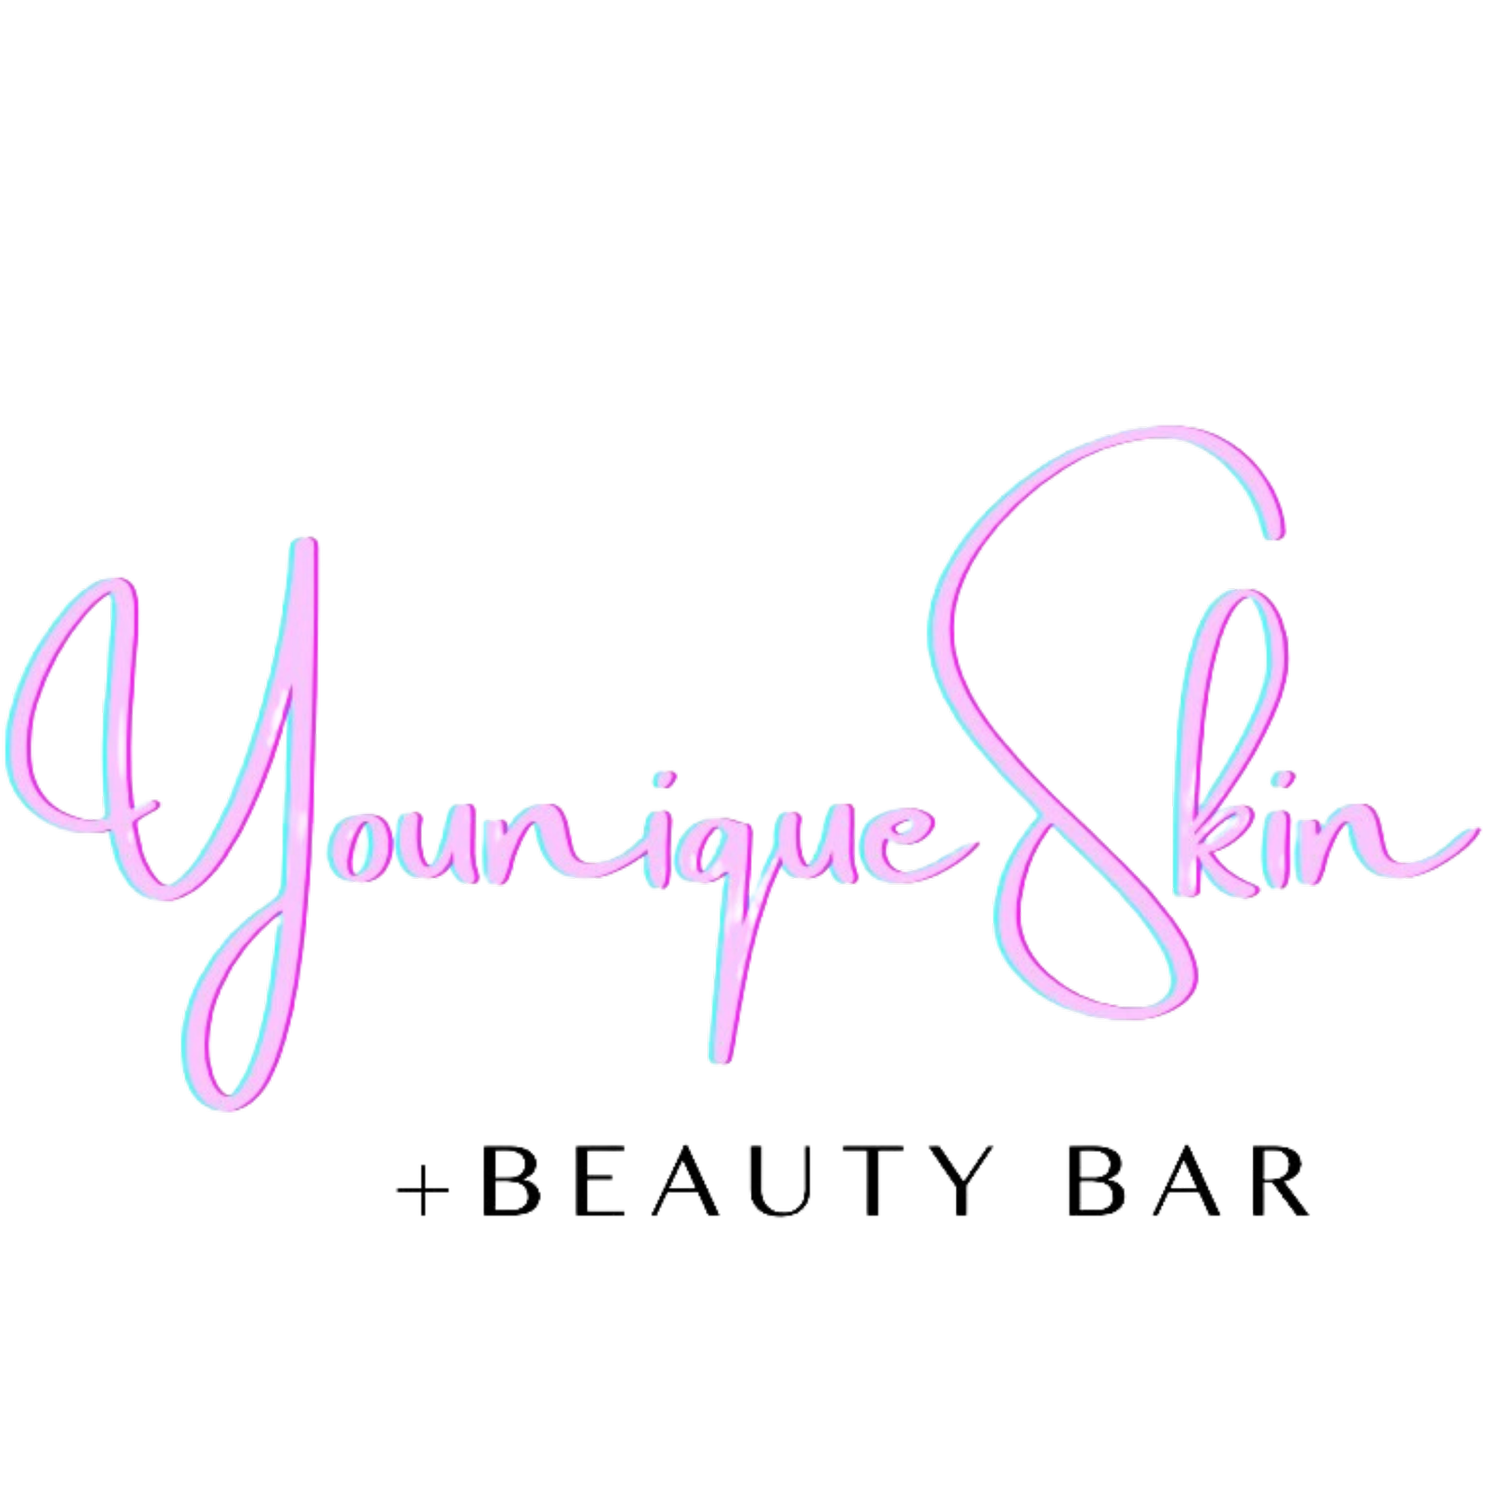 Younique Skin + Beauty Bar